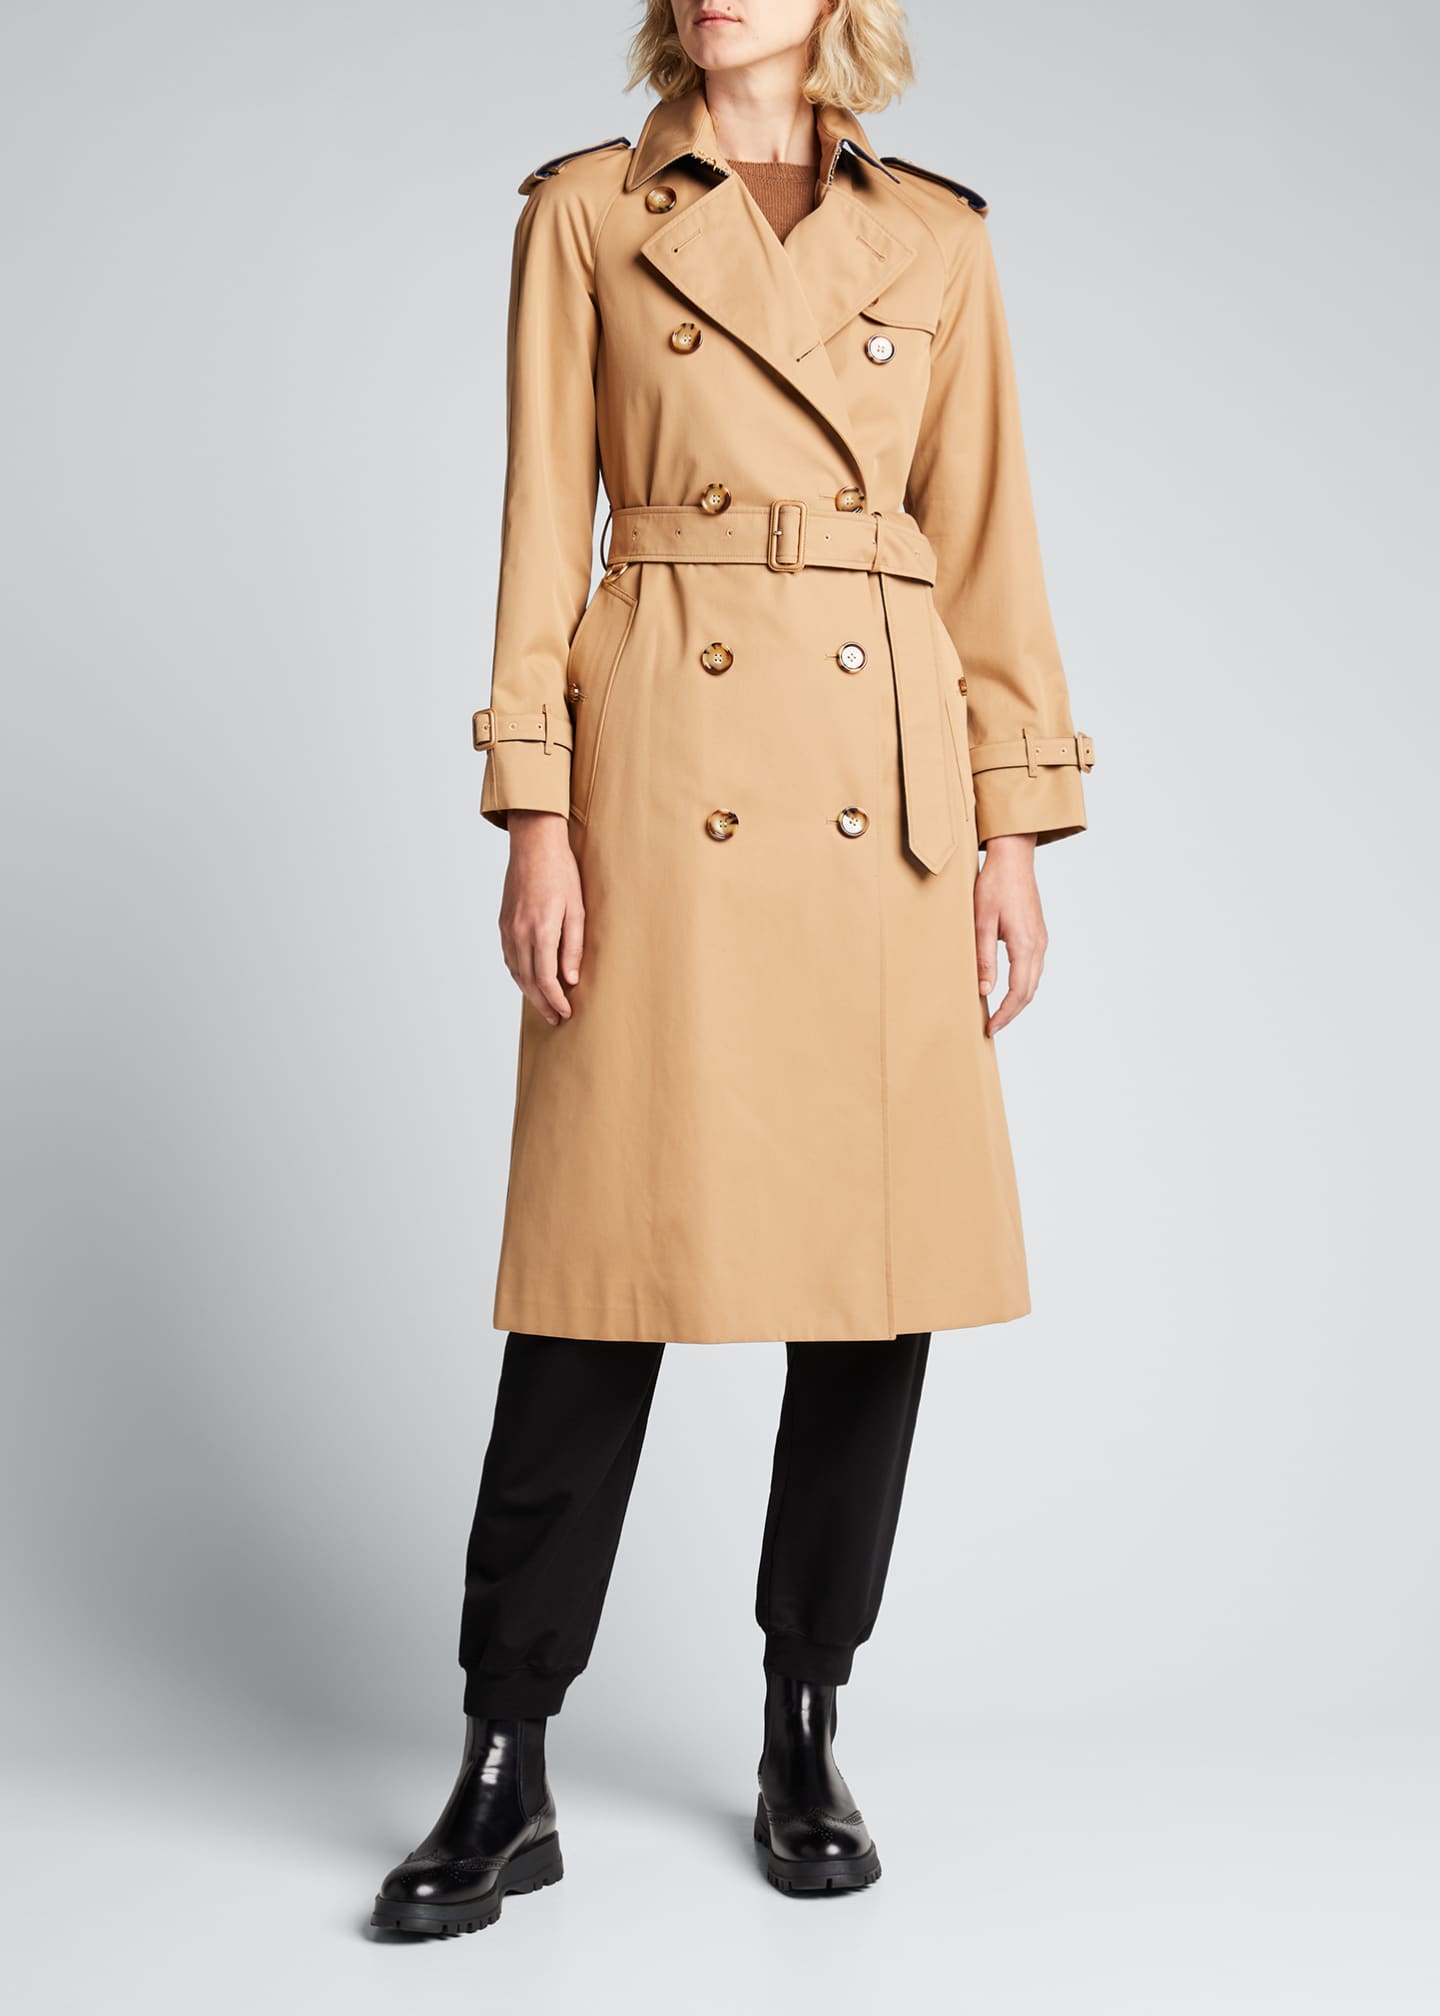 Burberry Waterloo Classic Double-Breasted Trench Coat - Bergdorf Goodman